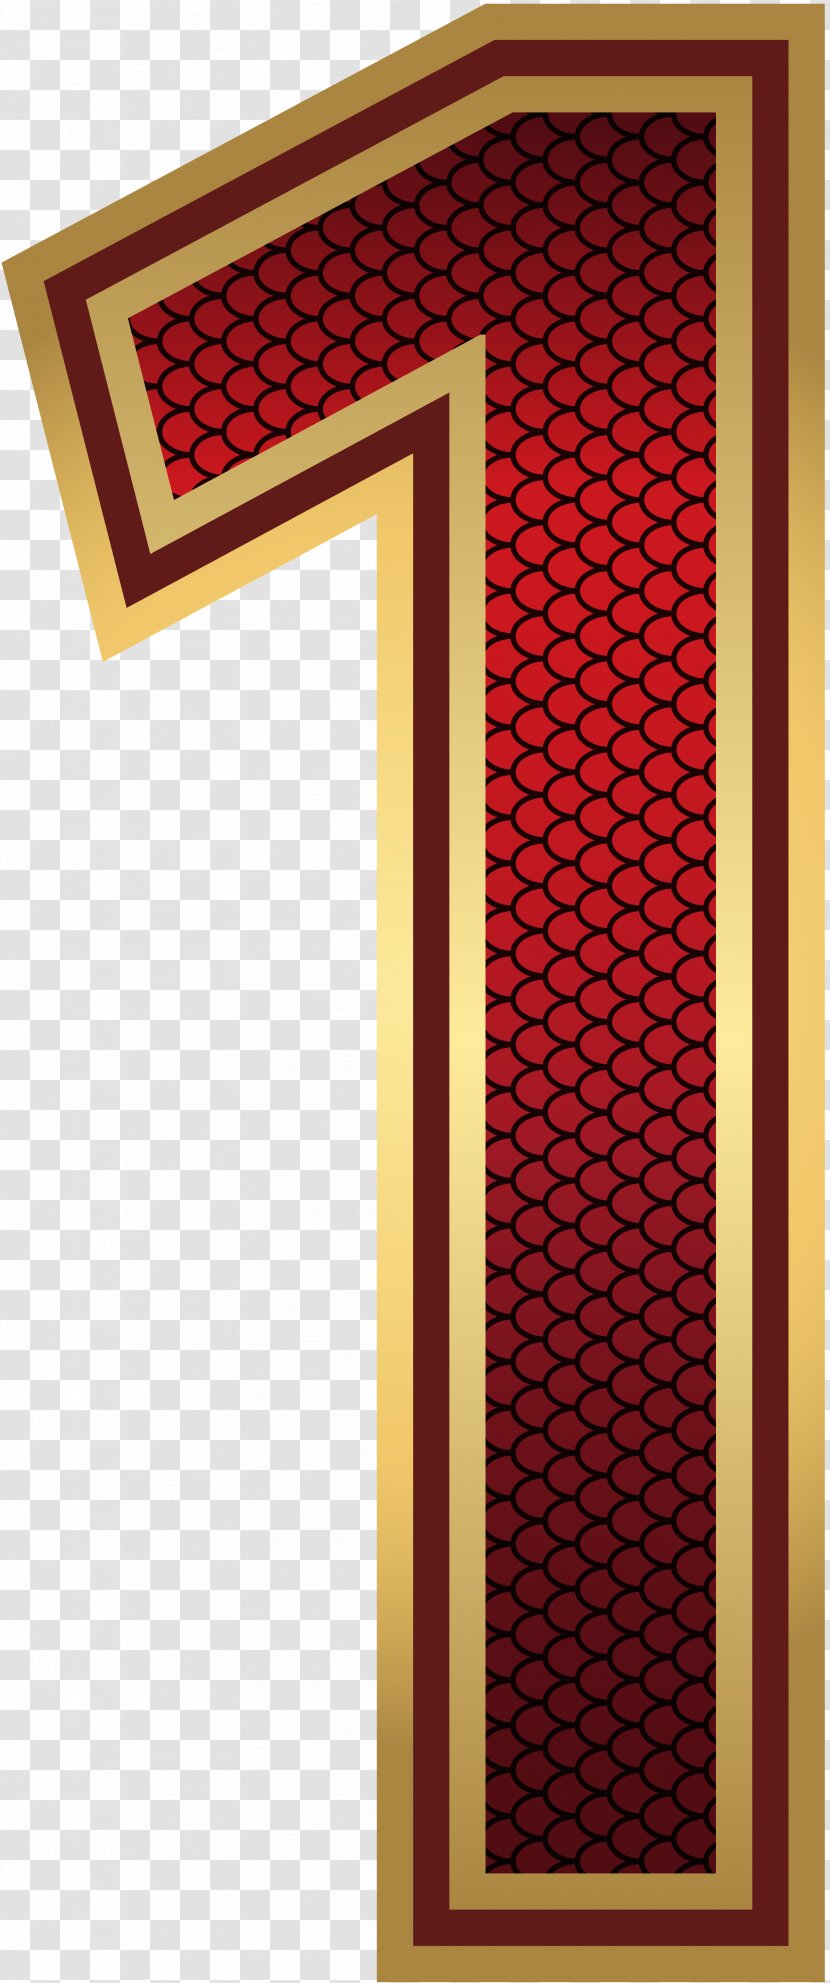 Red And Gold Number One Image - Editing - Pattern Transparent PNG